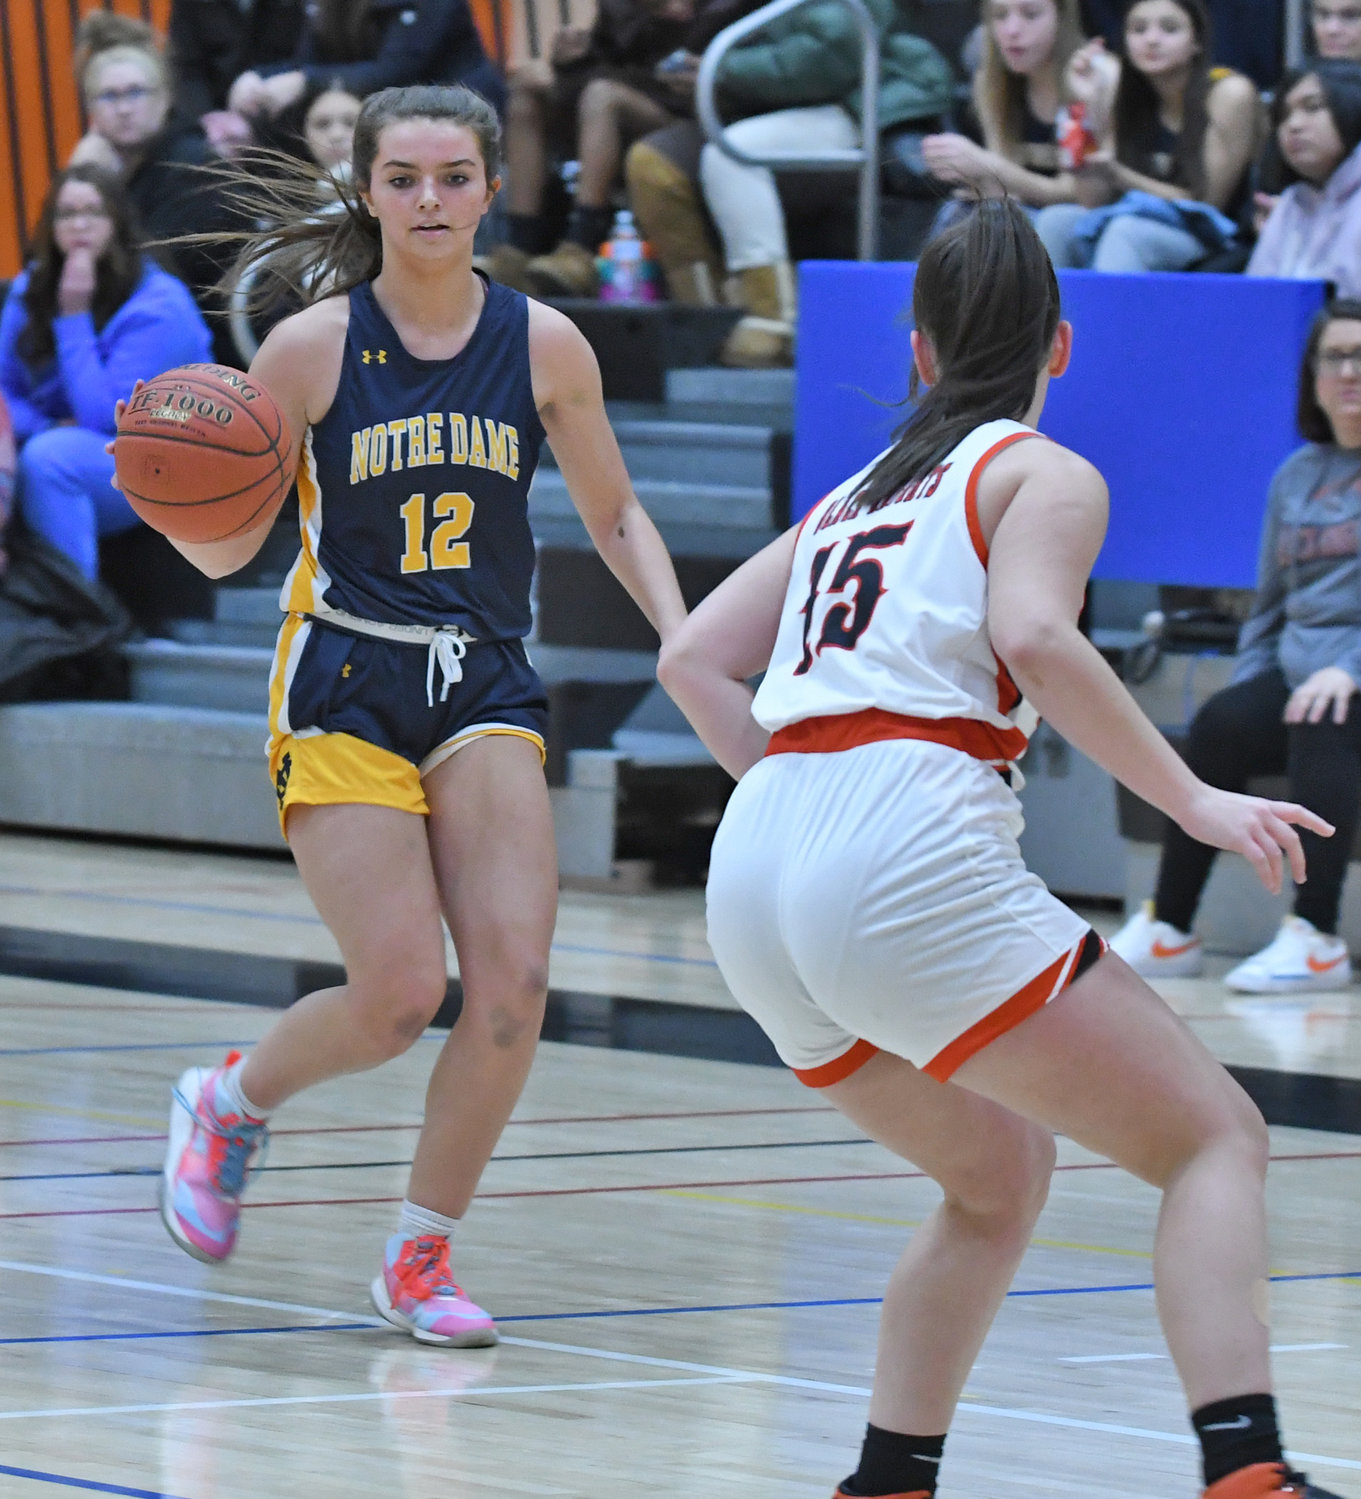 Notre Dame's Sydney Sehring brings the ball up the court with Rome Free Academy's Emma Wright guarding Tuesday at RFA. The Black Knights won 62-54 in a matchup of the teams at the top of the two Tri-Valley League divisions.